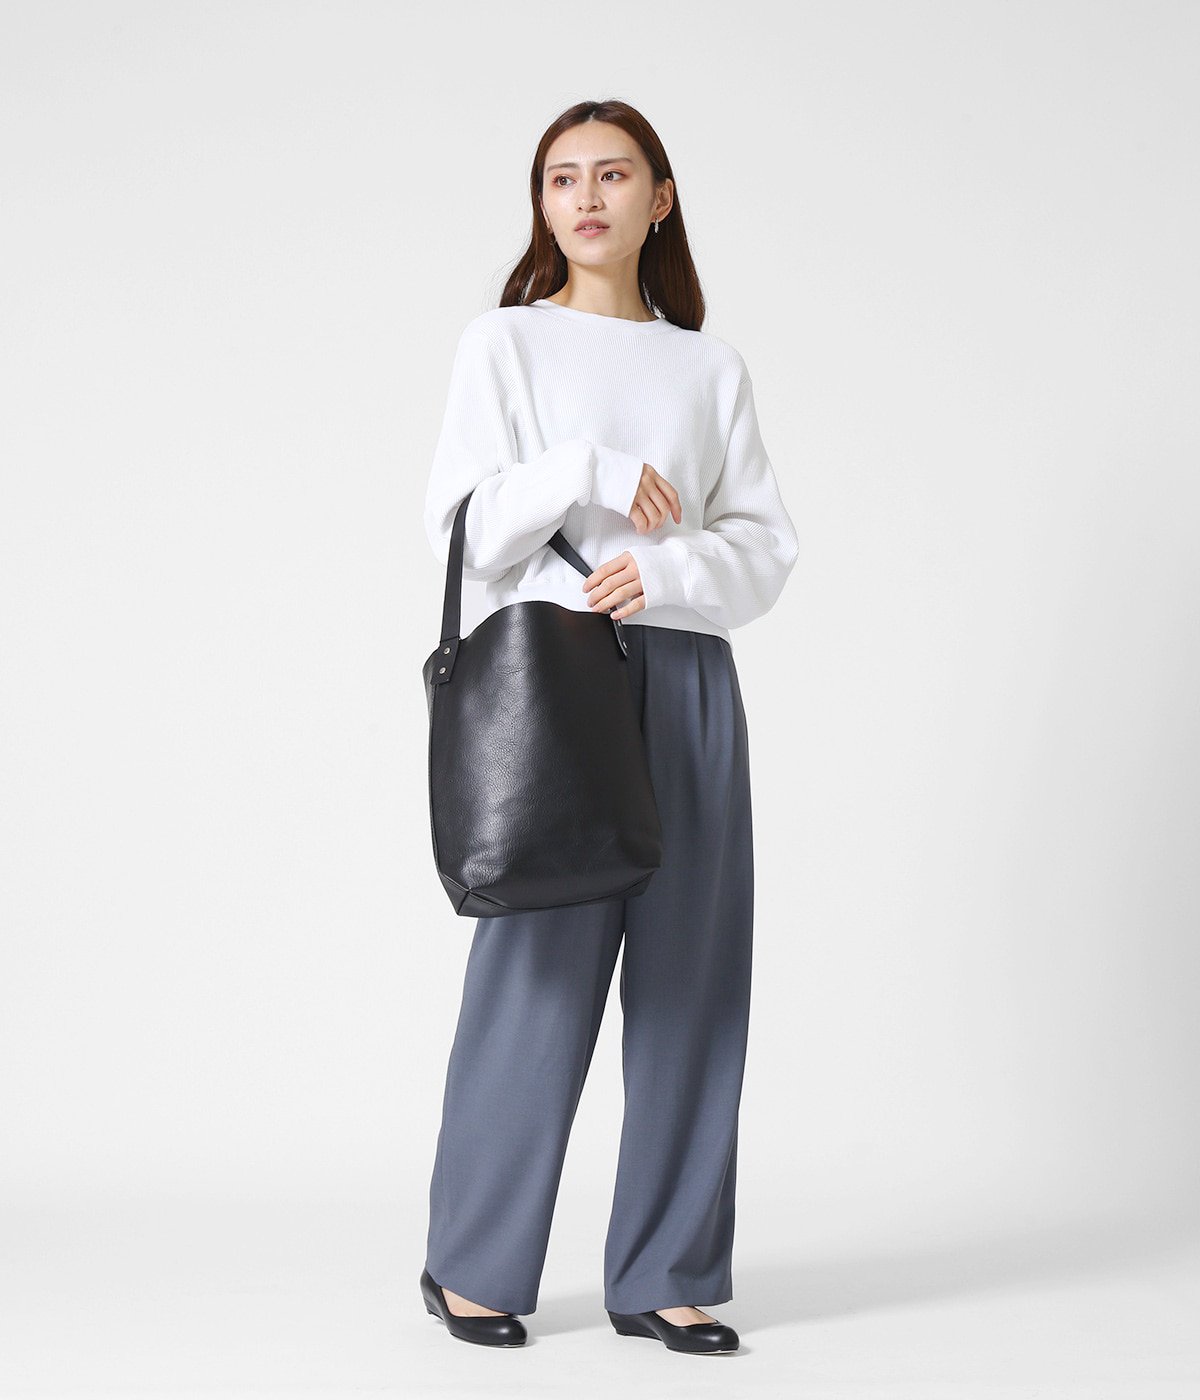 BAGUETTE TOTE LEATHER | TEMBEA(テンベア) / バッグ トートバッグ